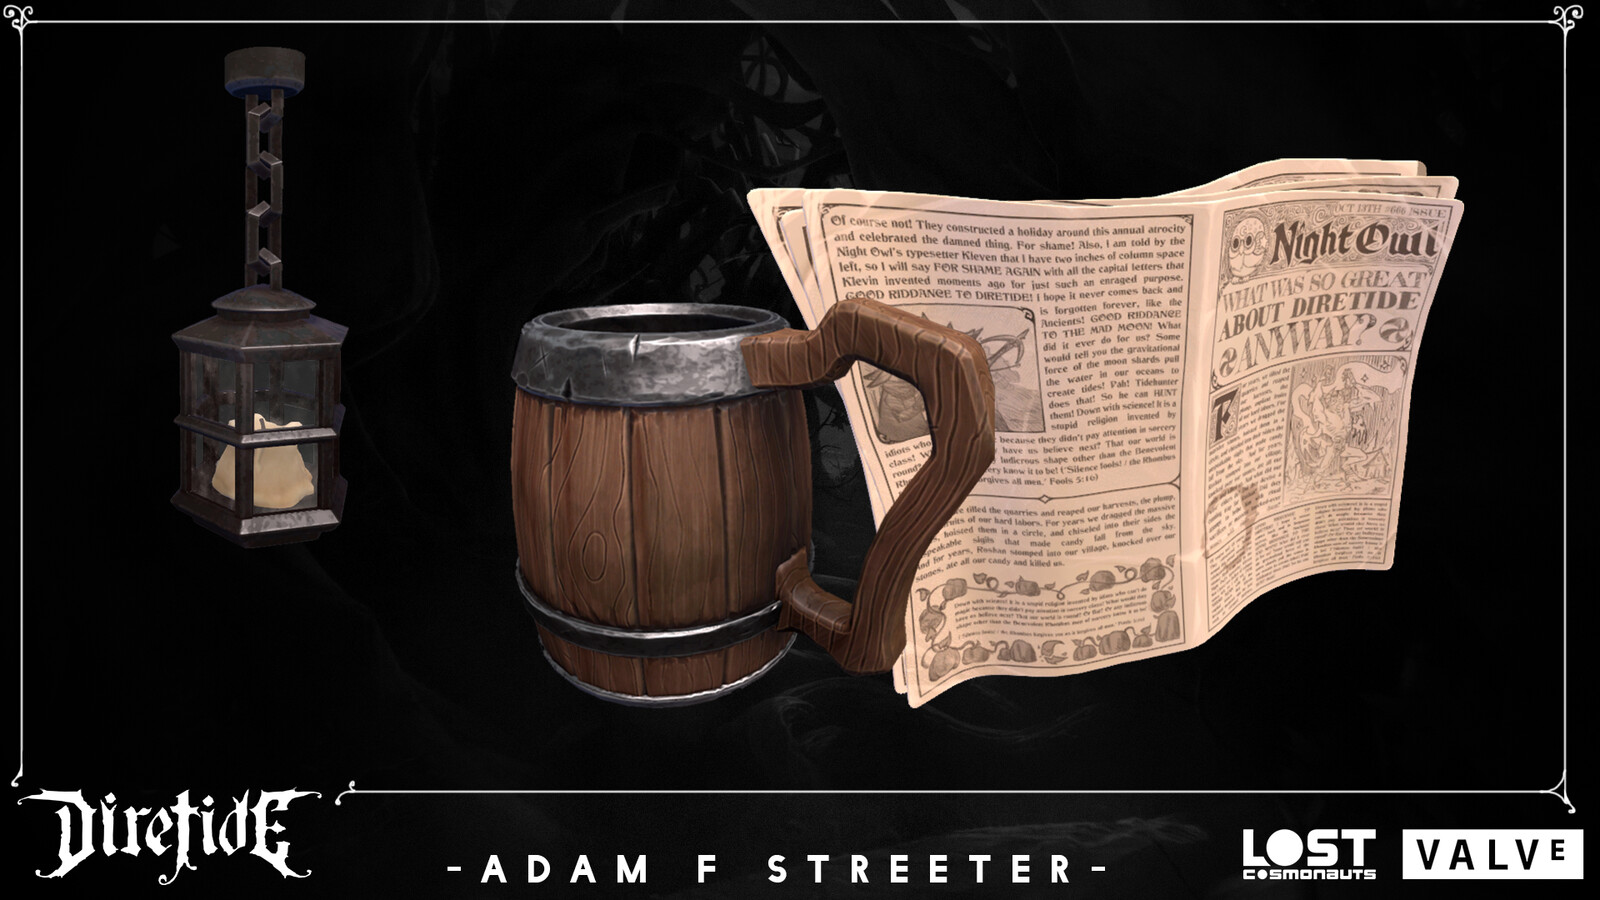 Props! Newspaper modeled by me. Edits by Tim Brown Lees. Rigging by Valve. Materials by Alfred Khamidullin.
Mug textures by me and Denis V. Model and sculpt by Denis.